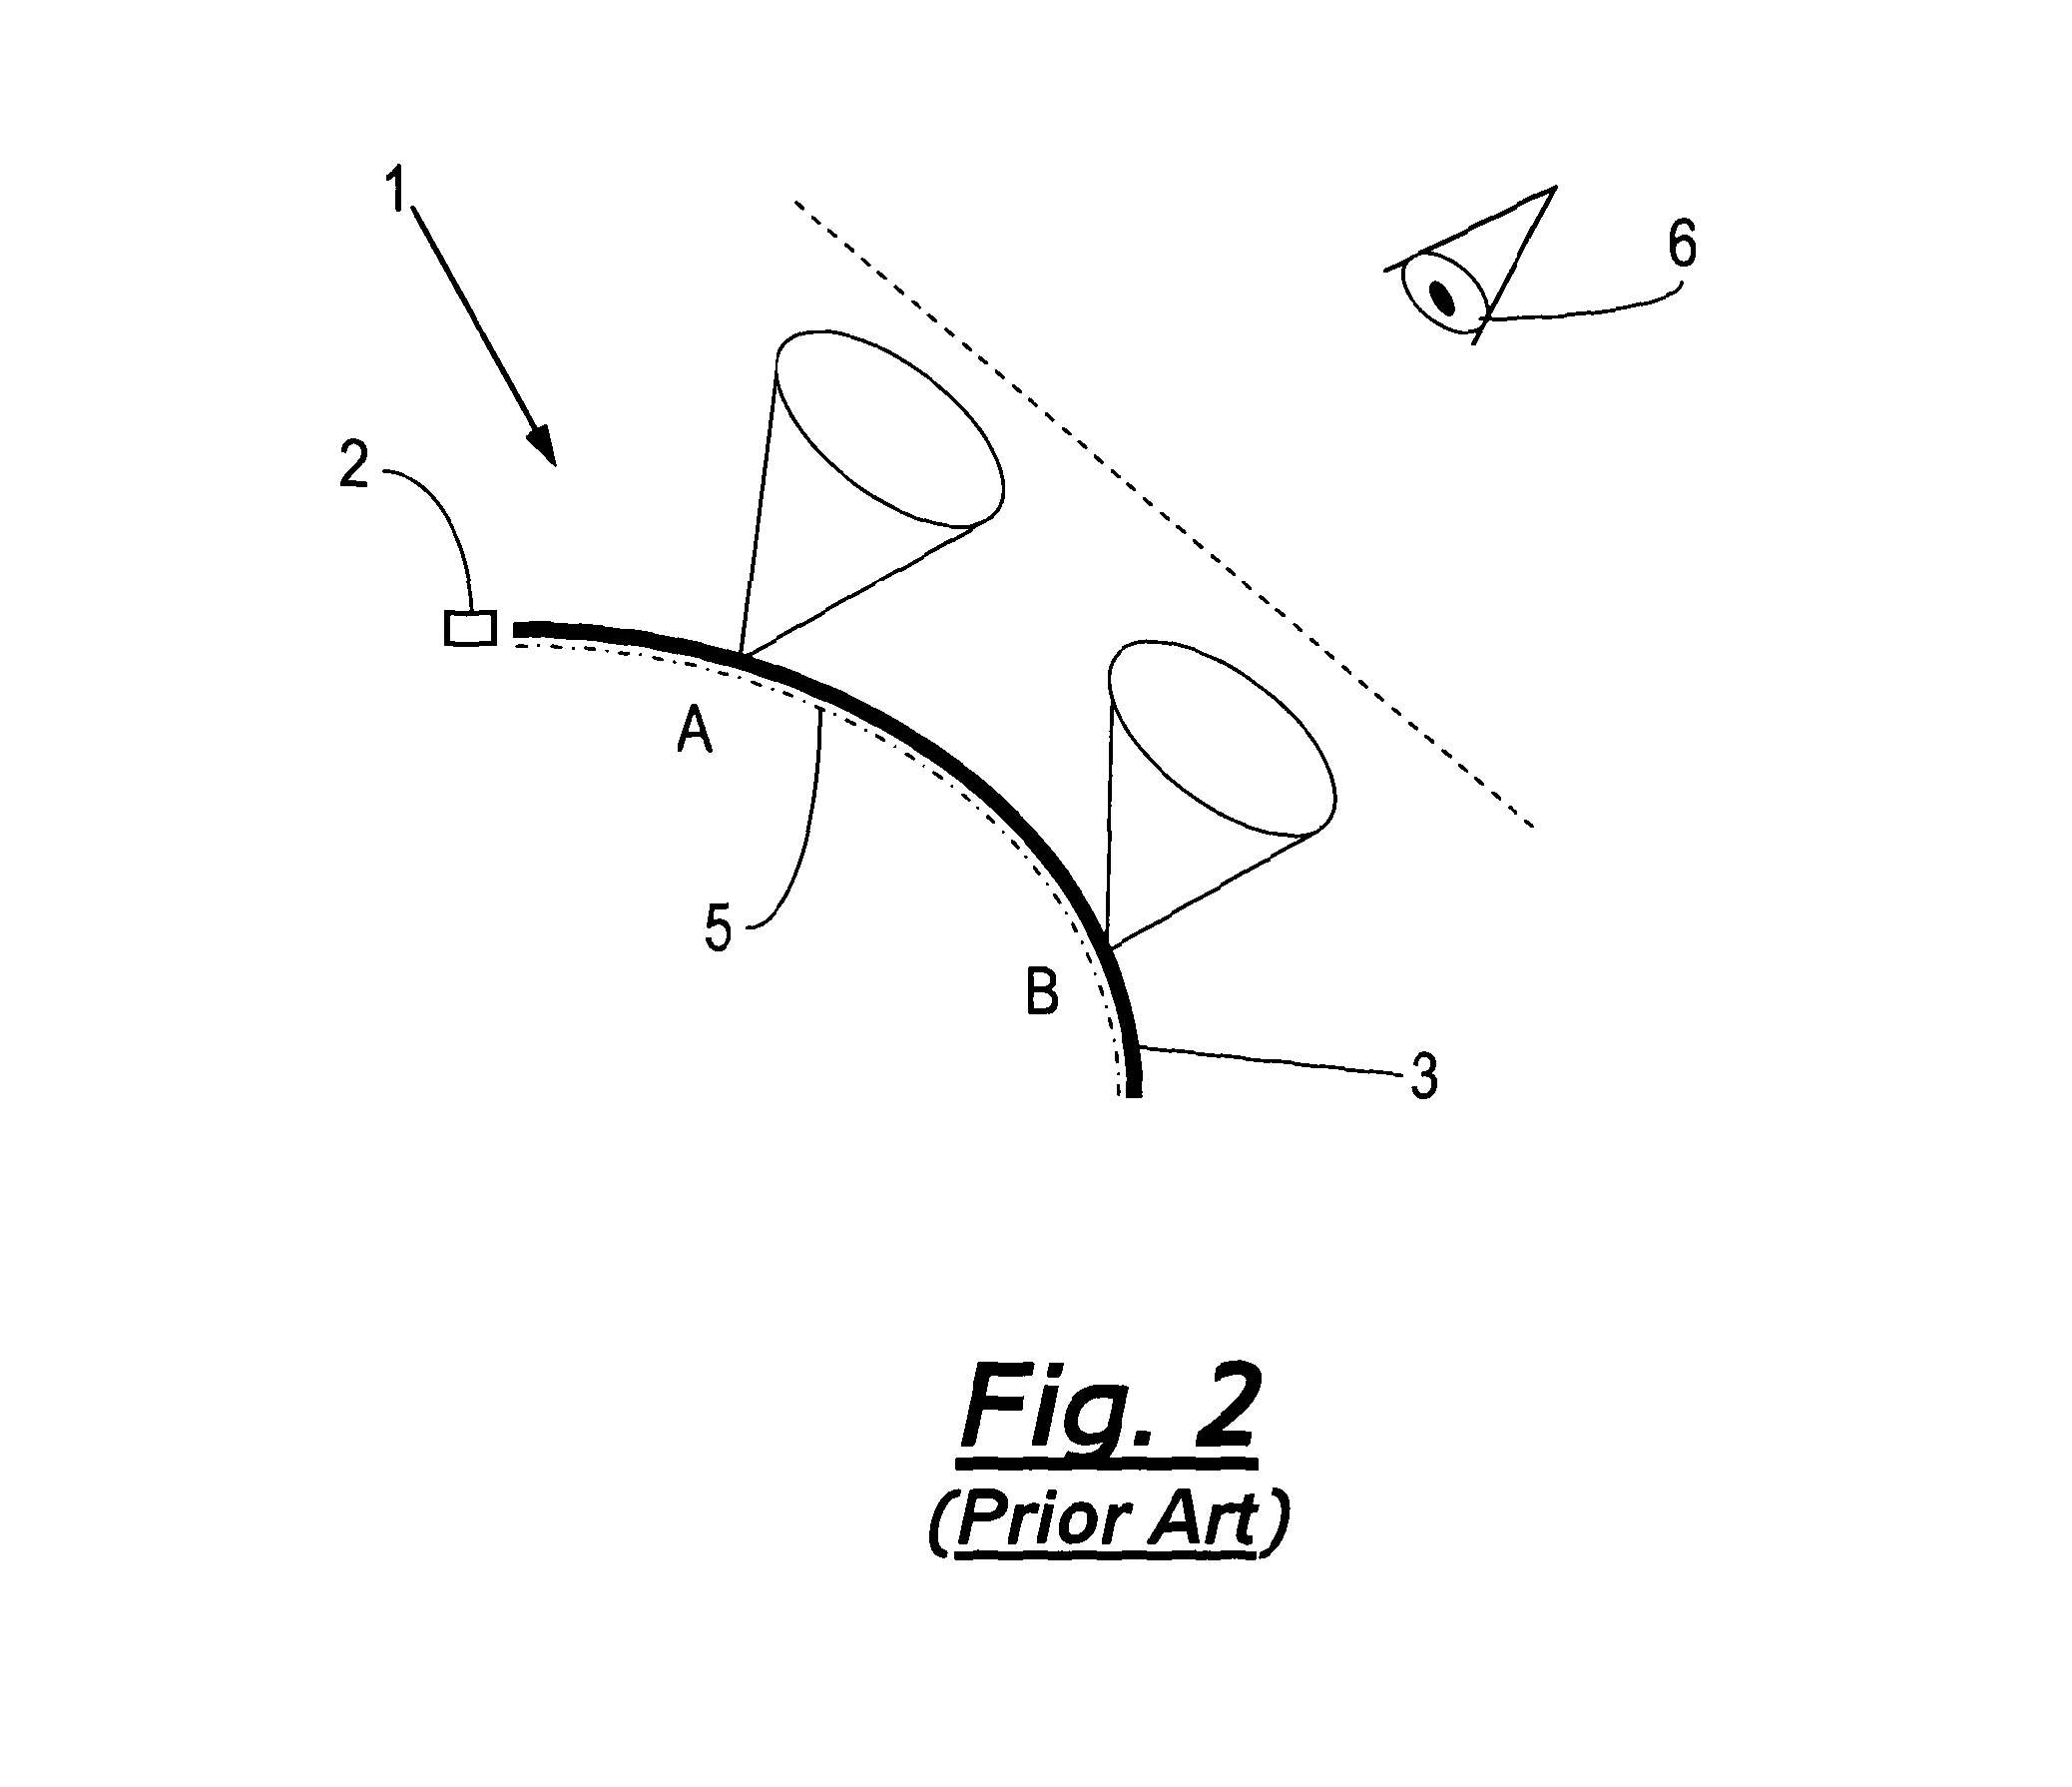 Light guide device